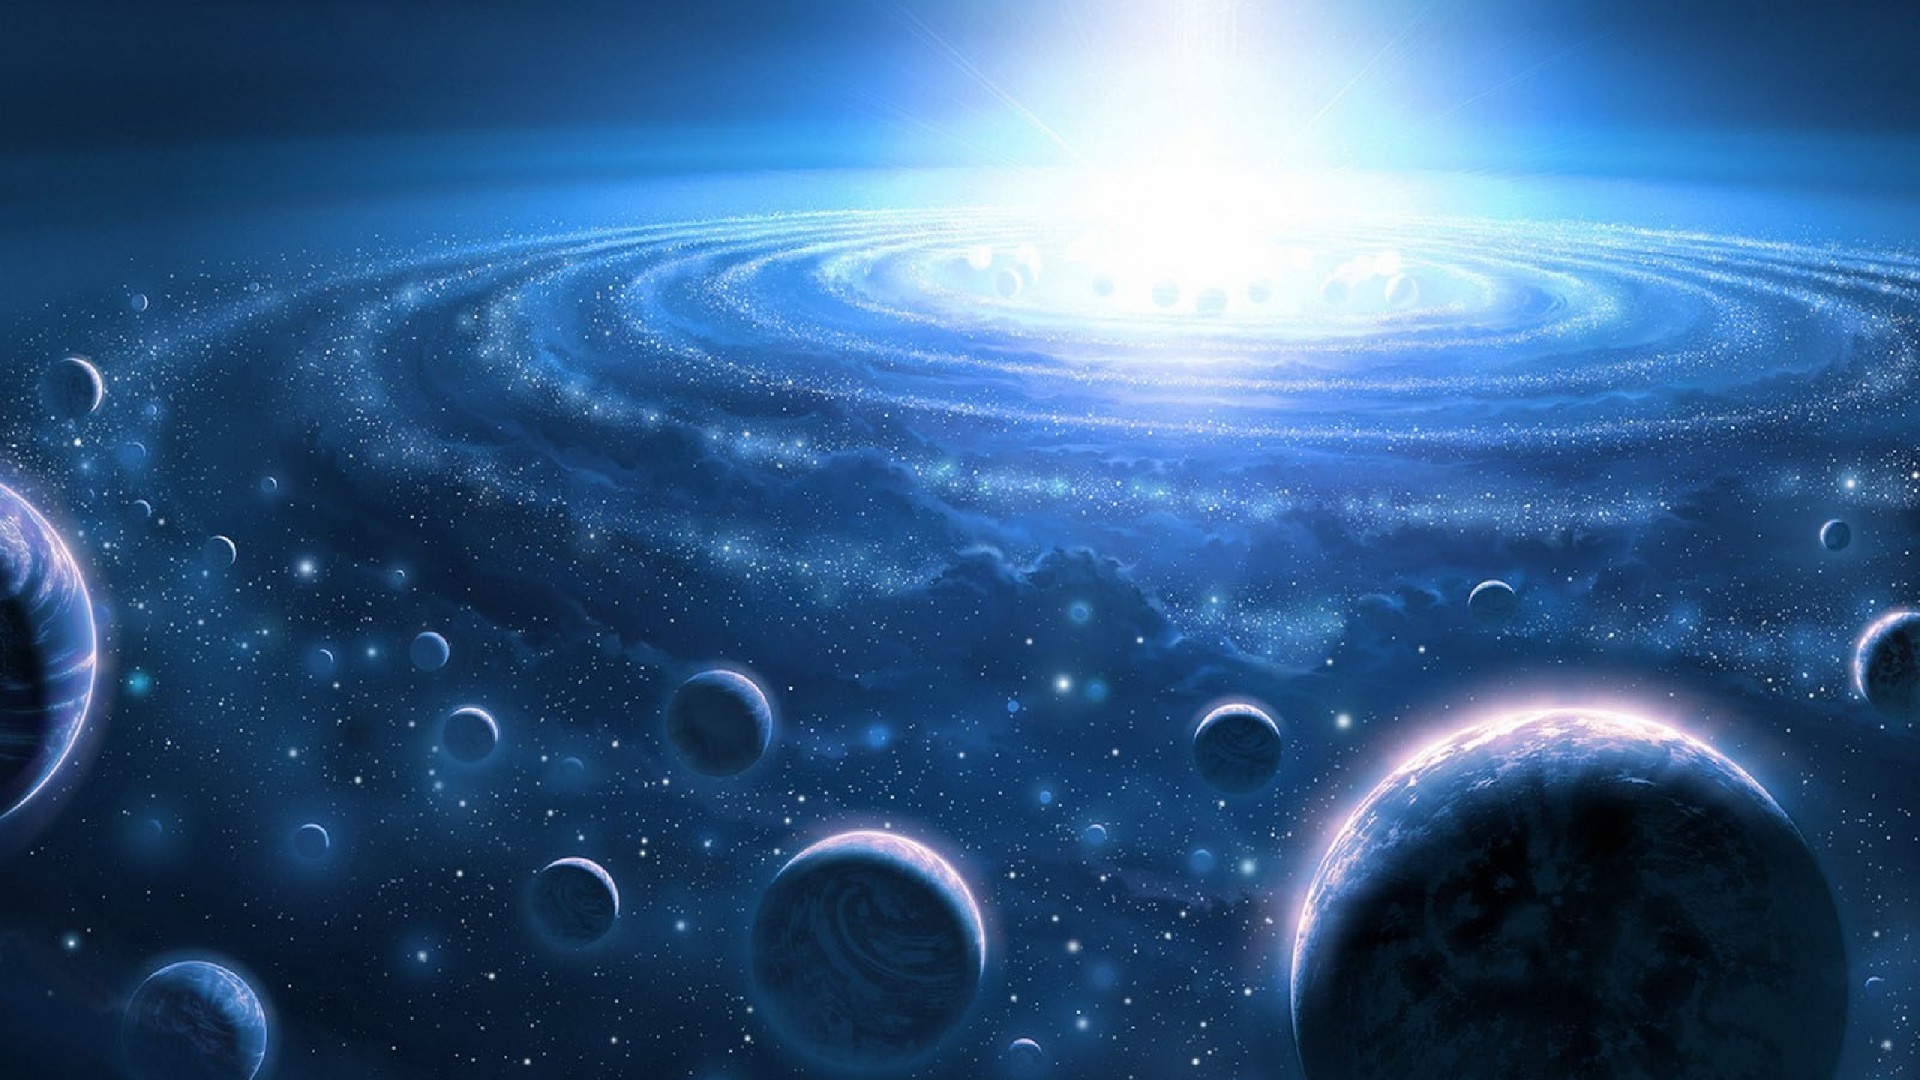 galaxy moon nature sky sun sea space astronomy desktop planet ocean water light infinity bright cold clear astrology